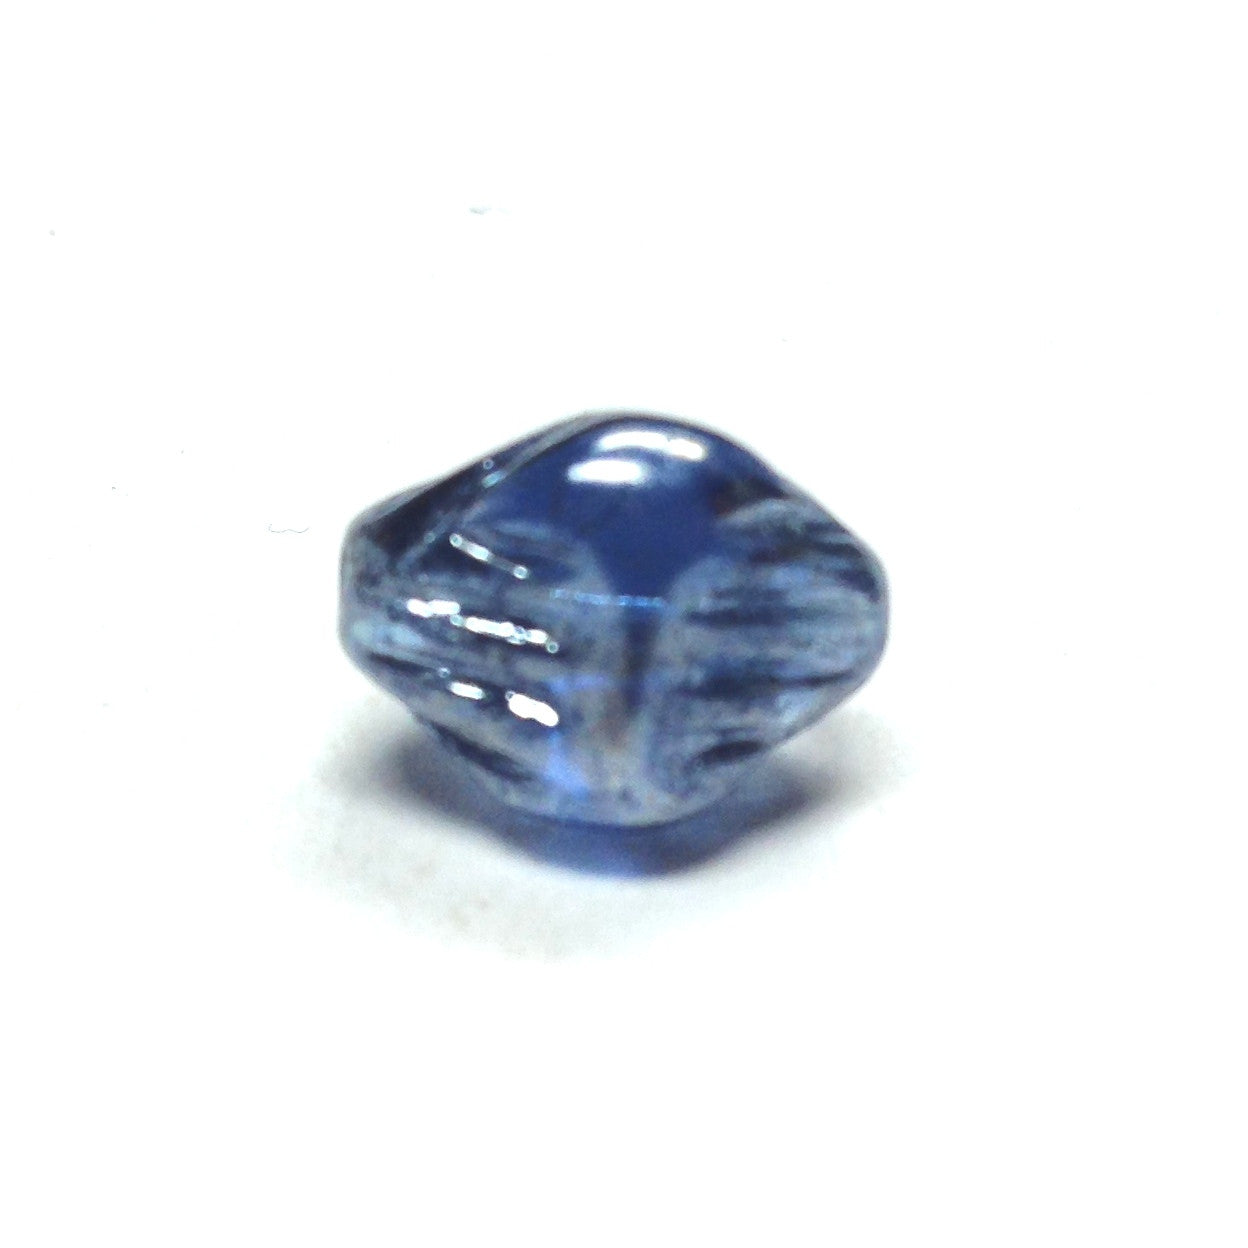 12MM Sapphire Blue Lustered Glass Nugget Bead (72 pieces)